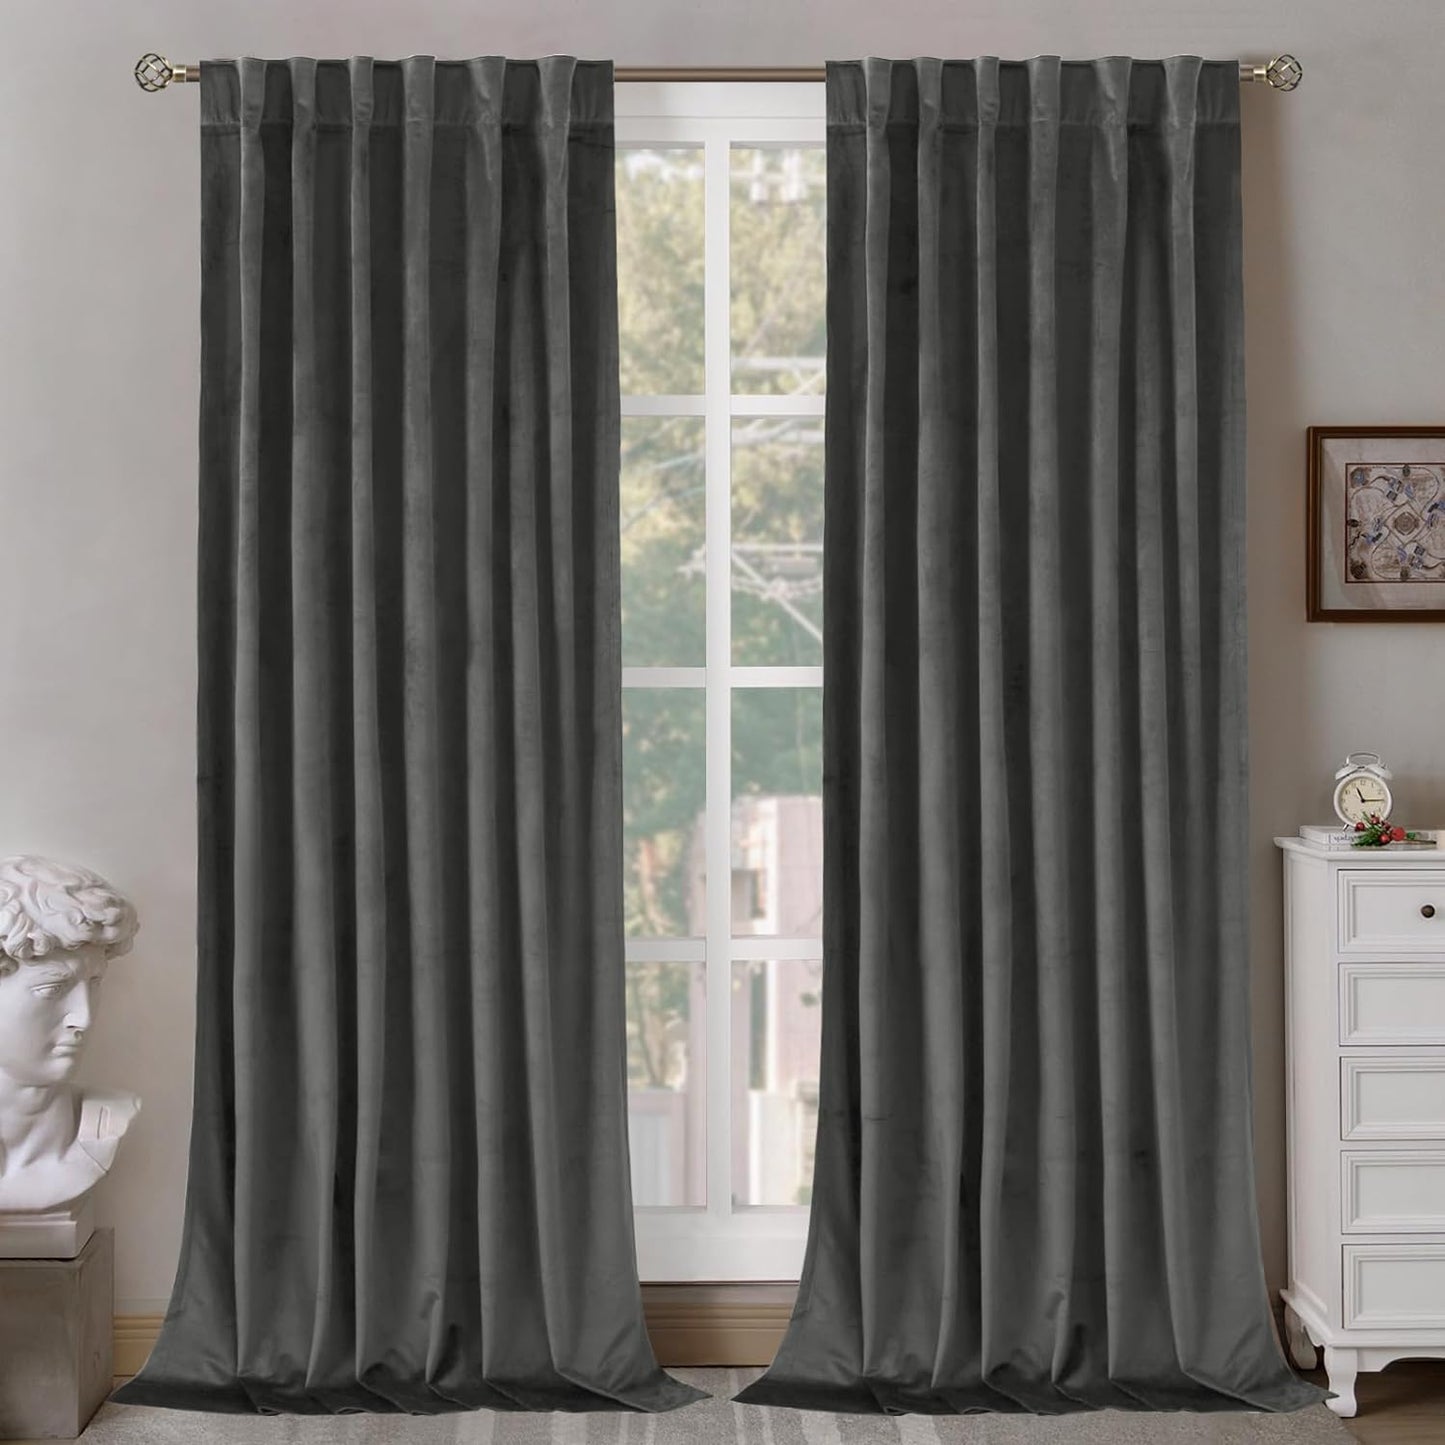 Bgment Grey Velvet Curtains 108 Inches Long for Living Room, Thermal Insulated Room Darkening Curtains Drapes Window Treatment with Back Tab and Rod Pocket, Set of 2 Panels, 52 X 108 Inch  BGment Grey 52W X 120L 